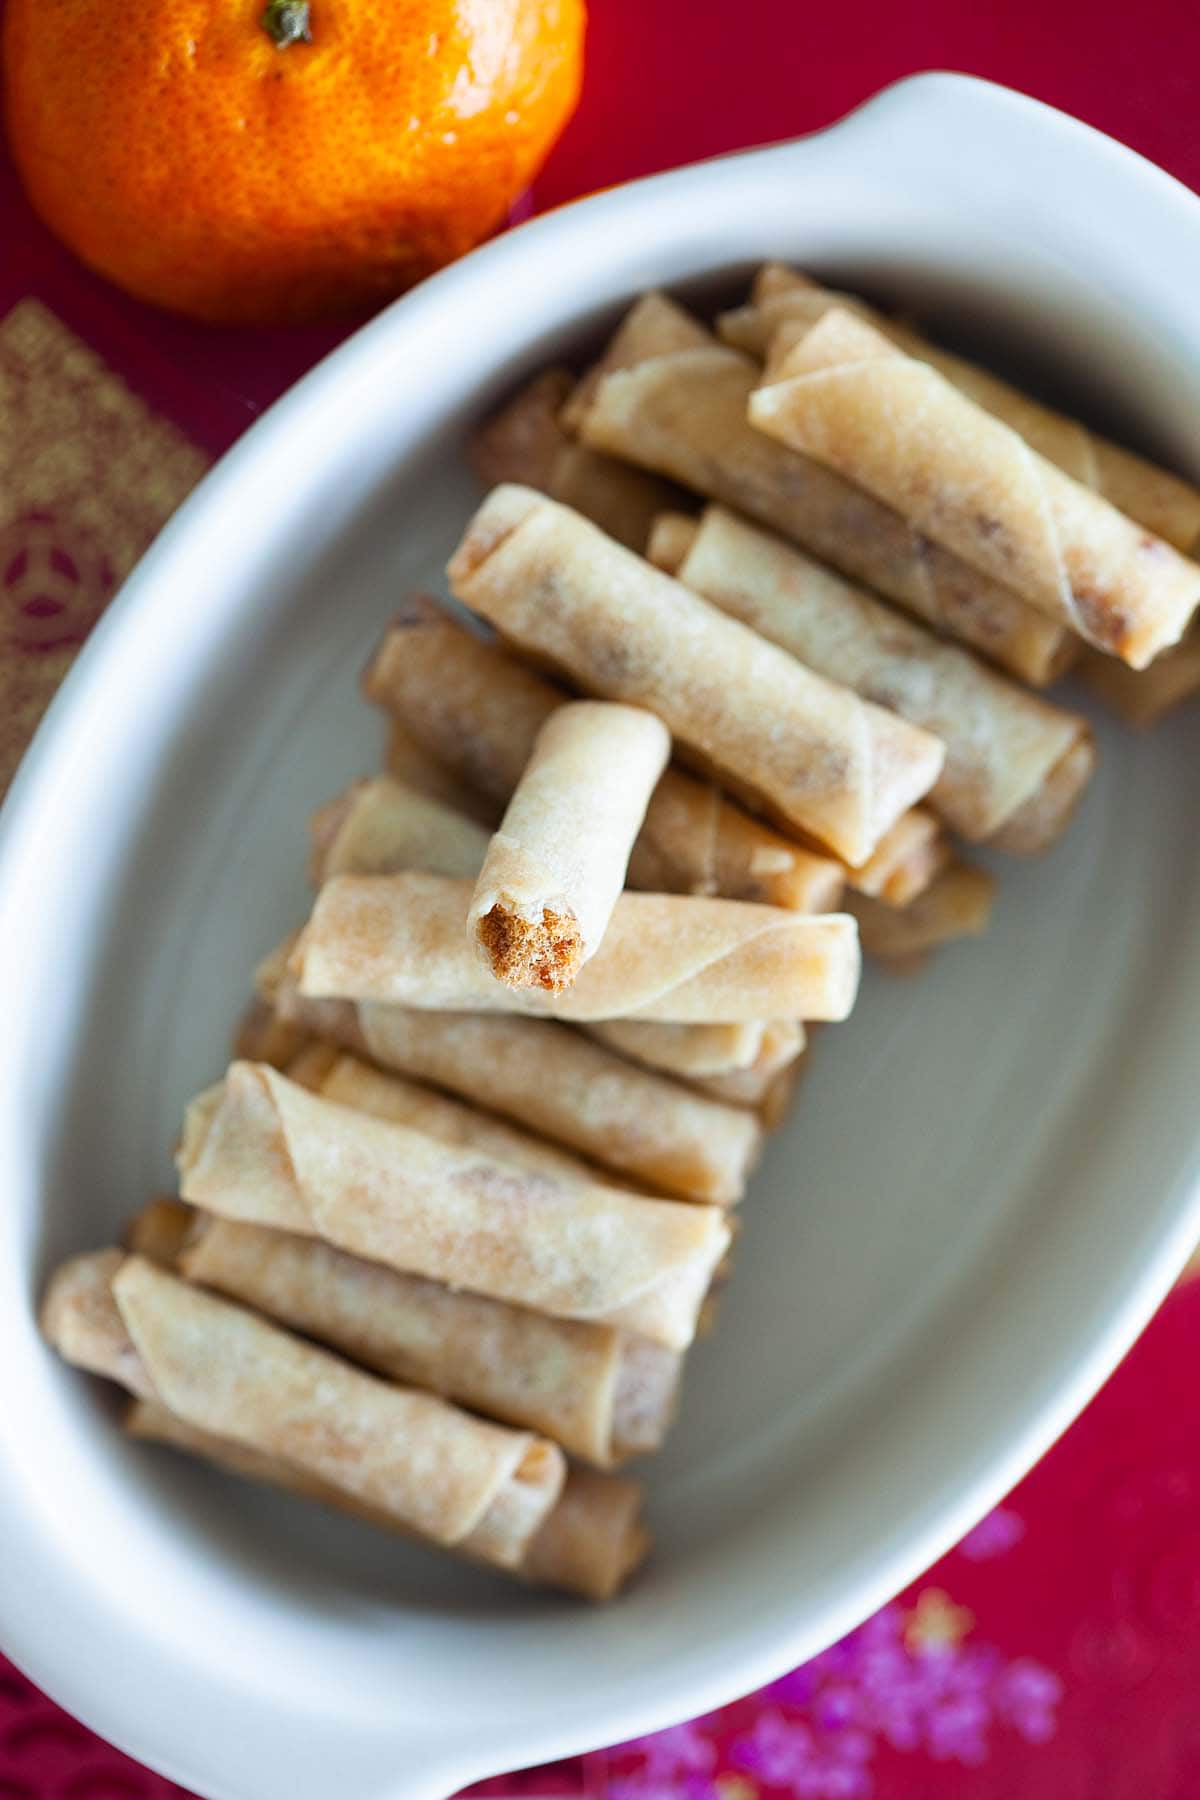 These mini spring rolls are filled with chicken floss and deep-fried.